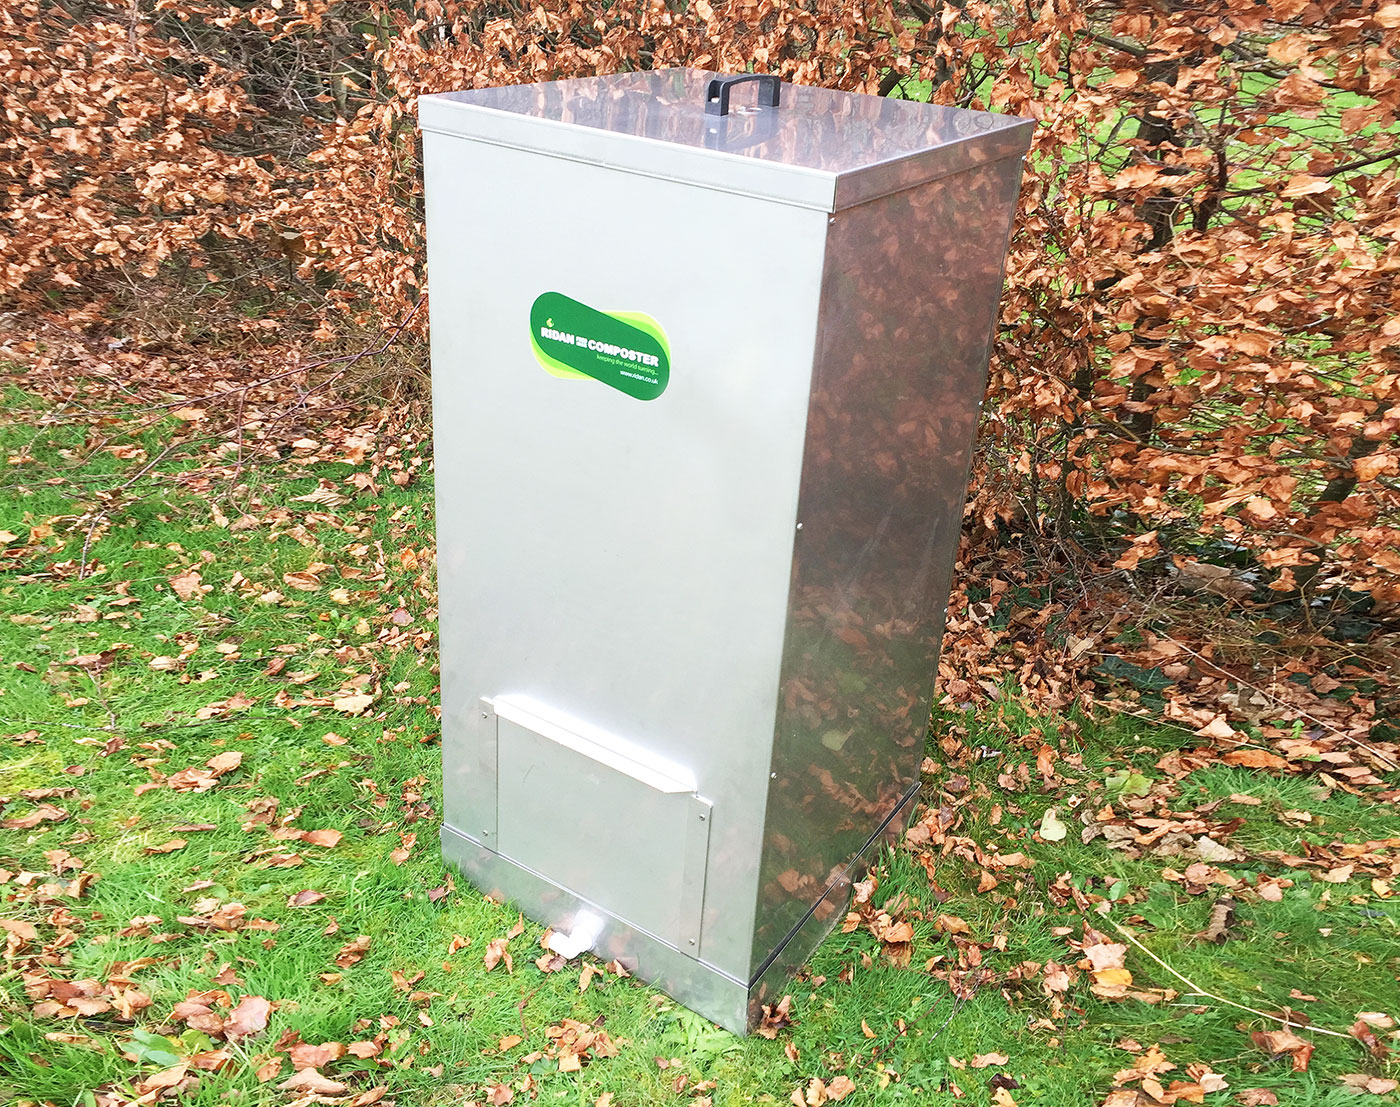 The Ridan Compost Box 4 food waste composter